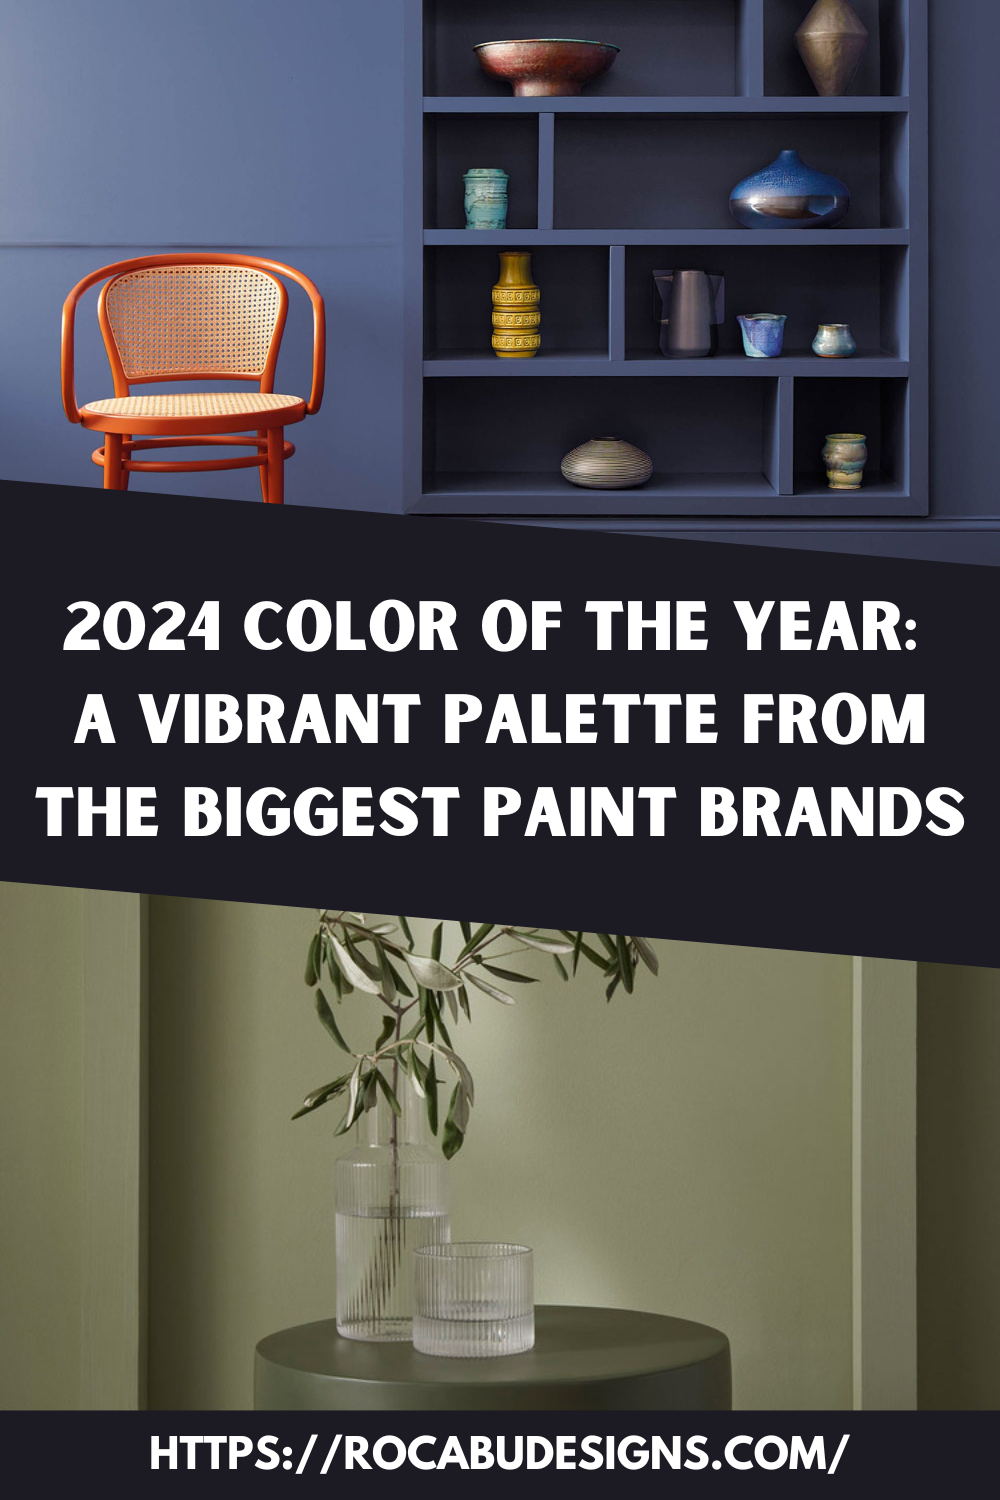 2024 Color of the Year: A Vibrant Palette from the Biggest Paint Brands